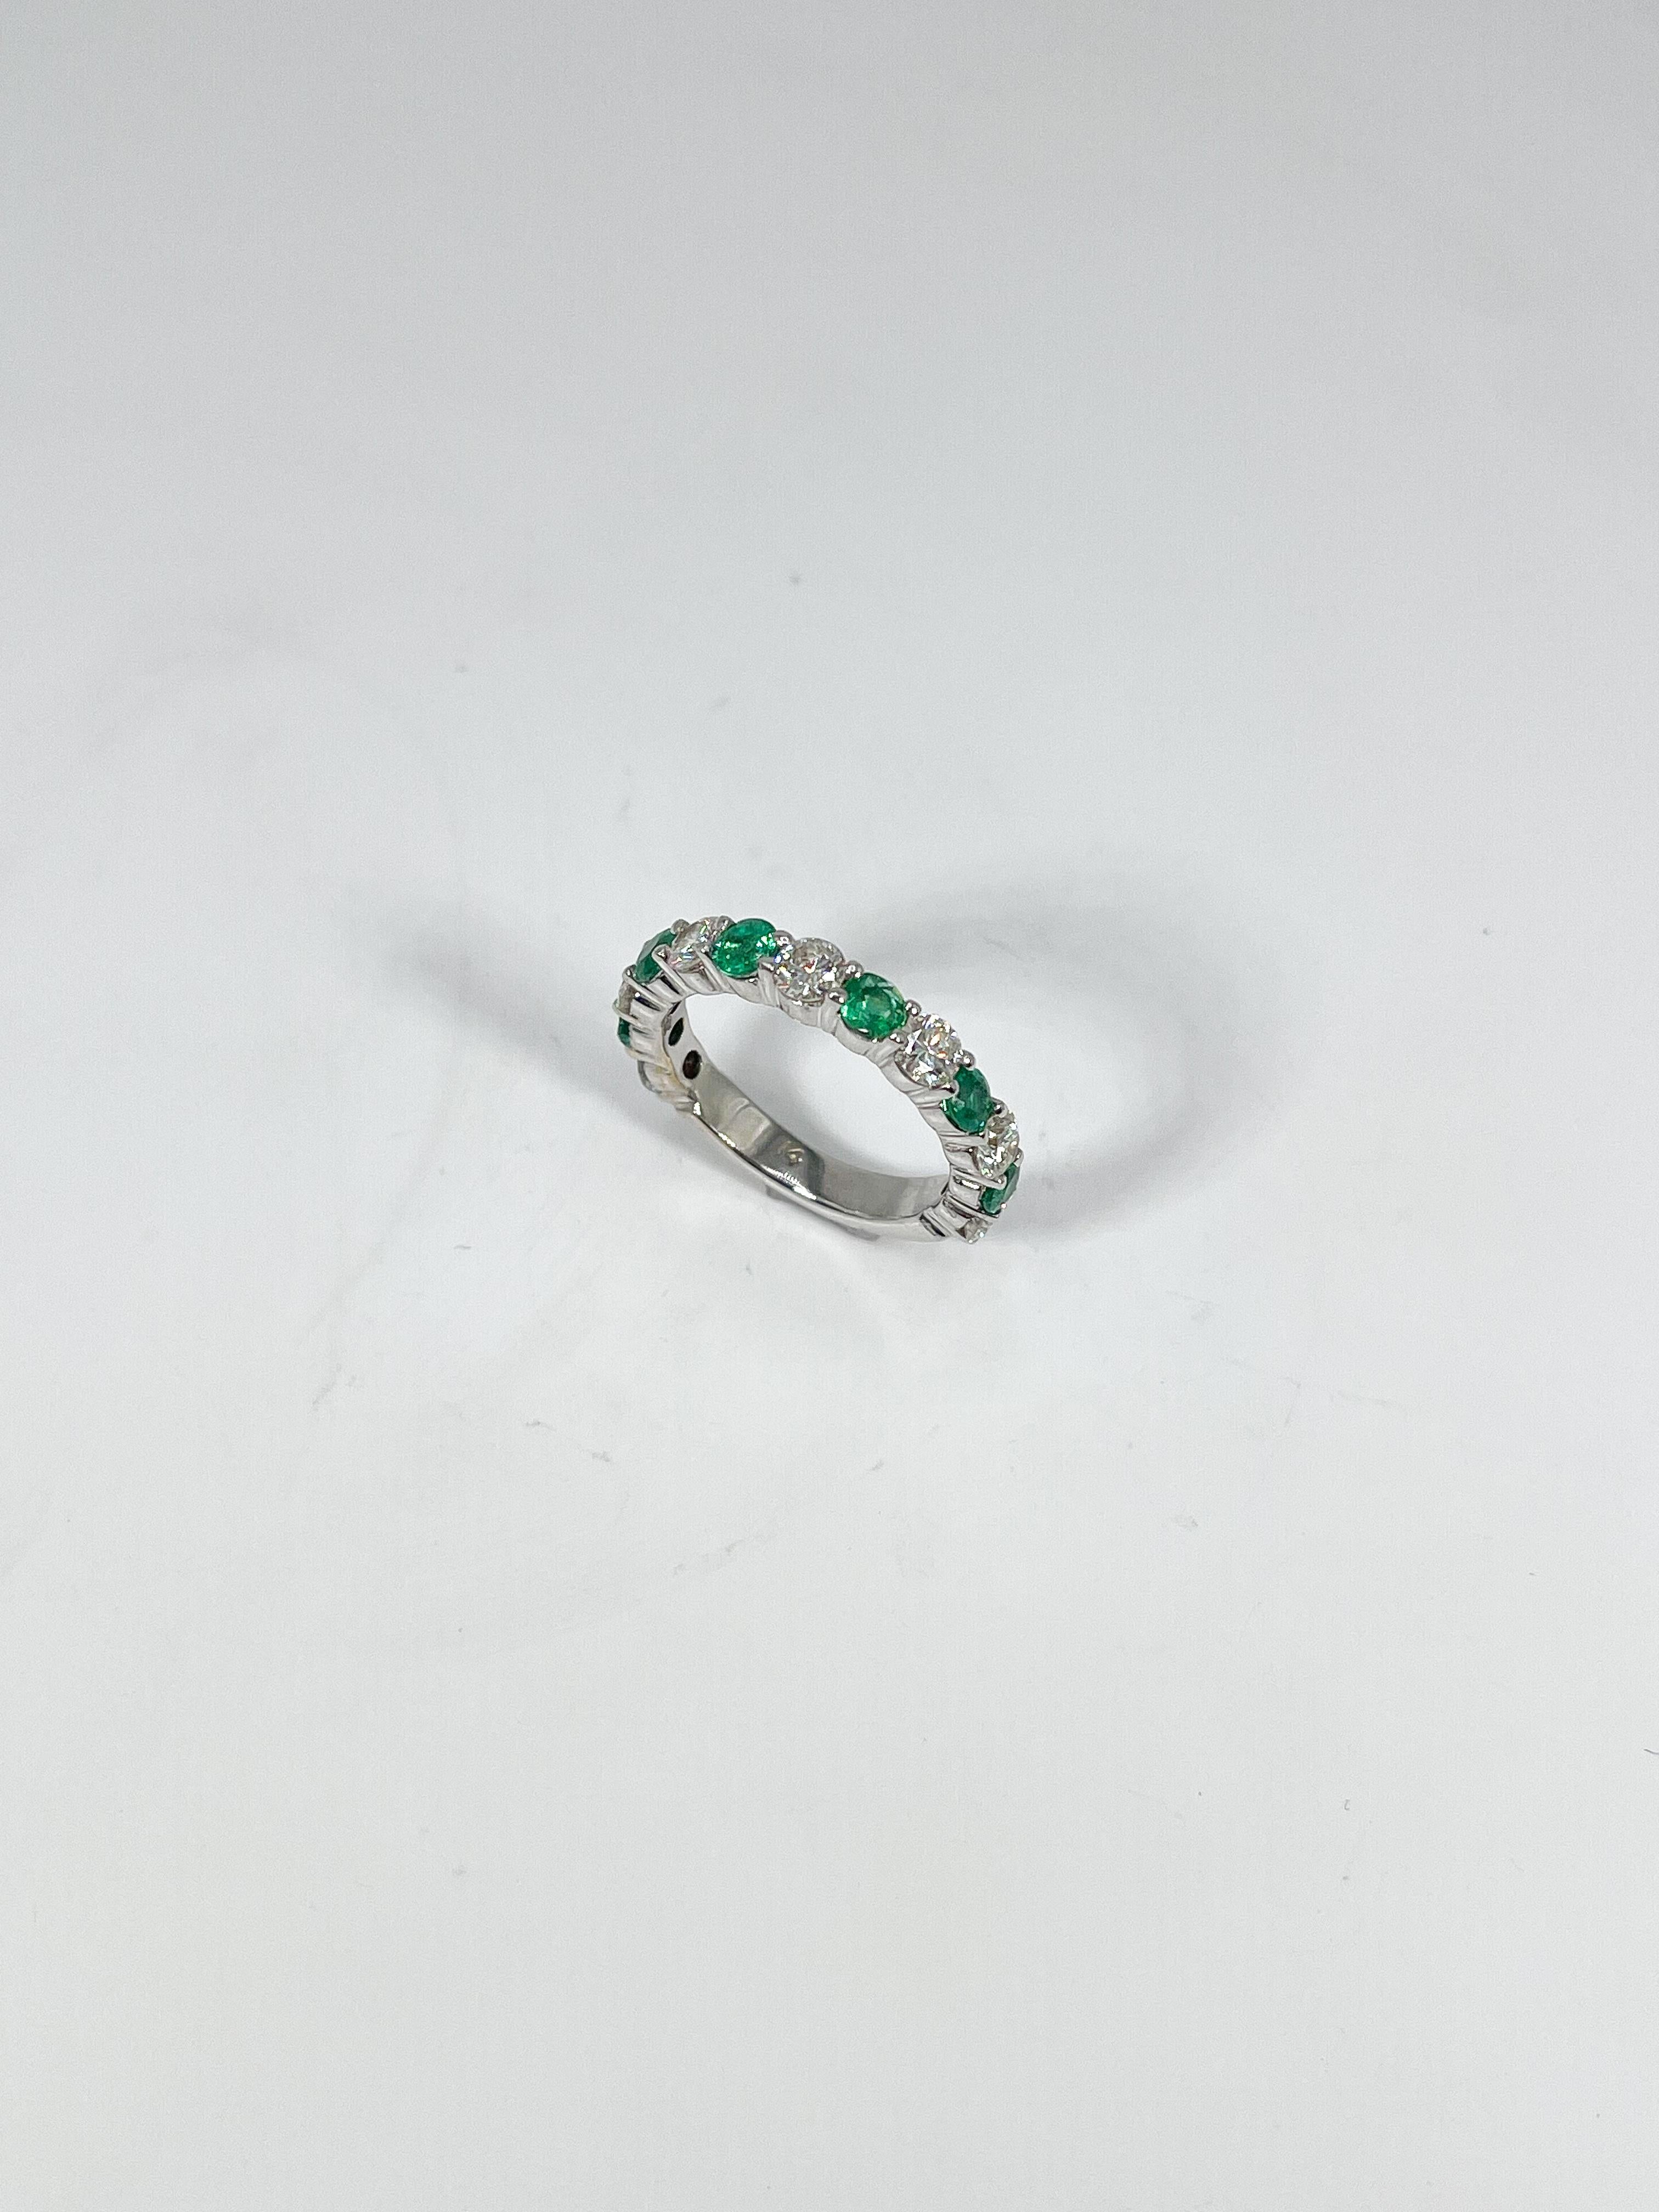 14k white gold 1 CTW diamond and 1 CTW Emerald anniversary band. The stones in this ring are all round, the ring size is a 5 1/4, the width is 3.5 mm, and it has a total weight of 4.1 grams.